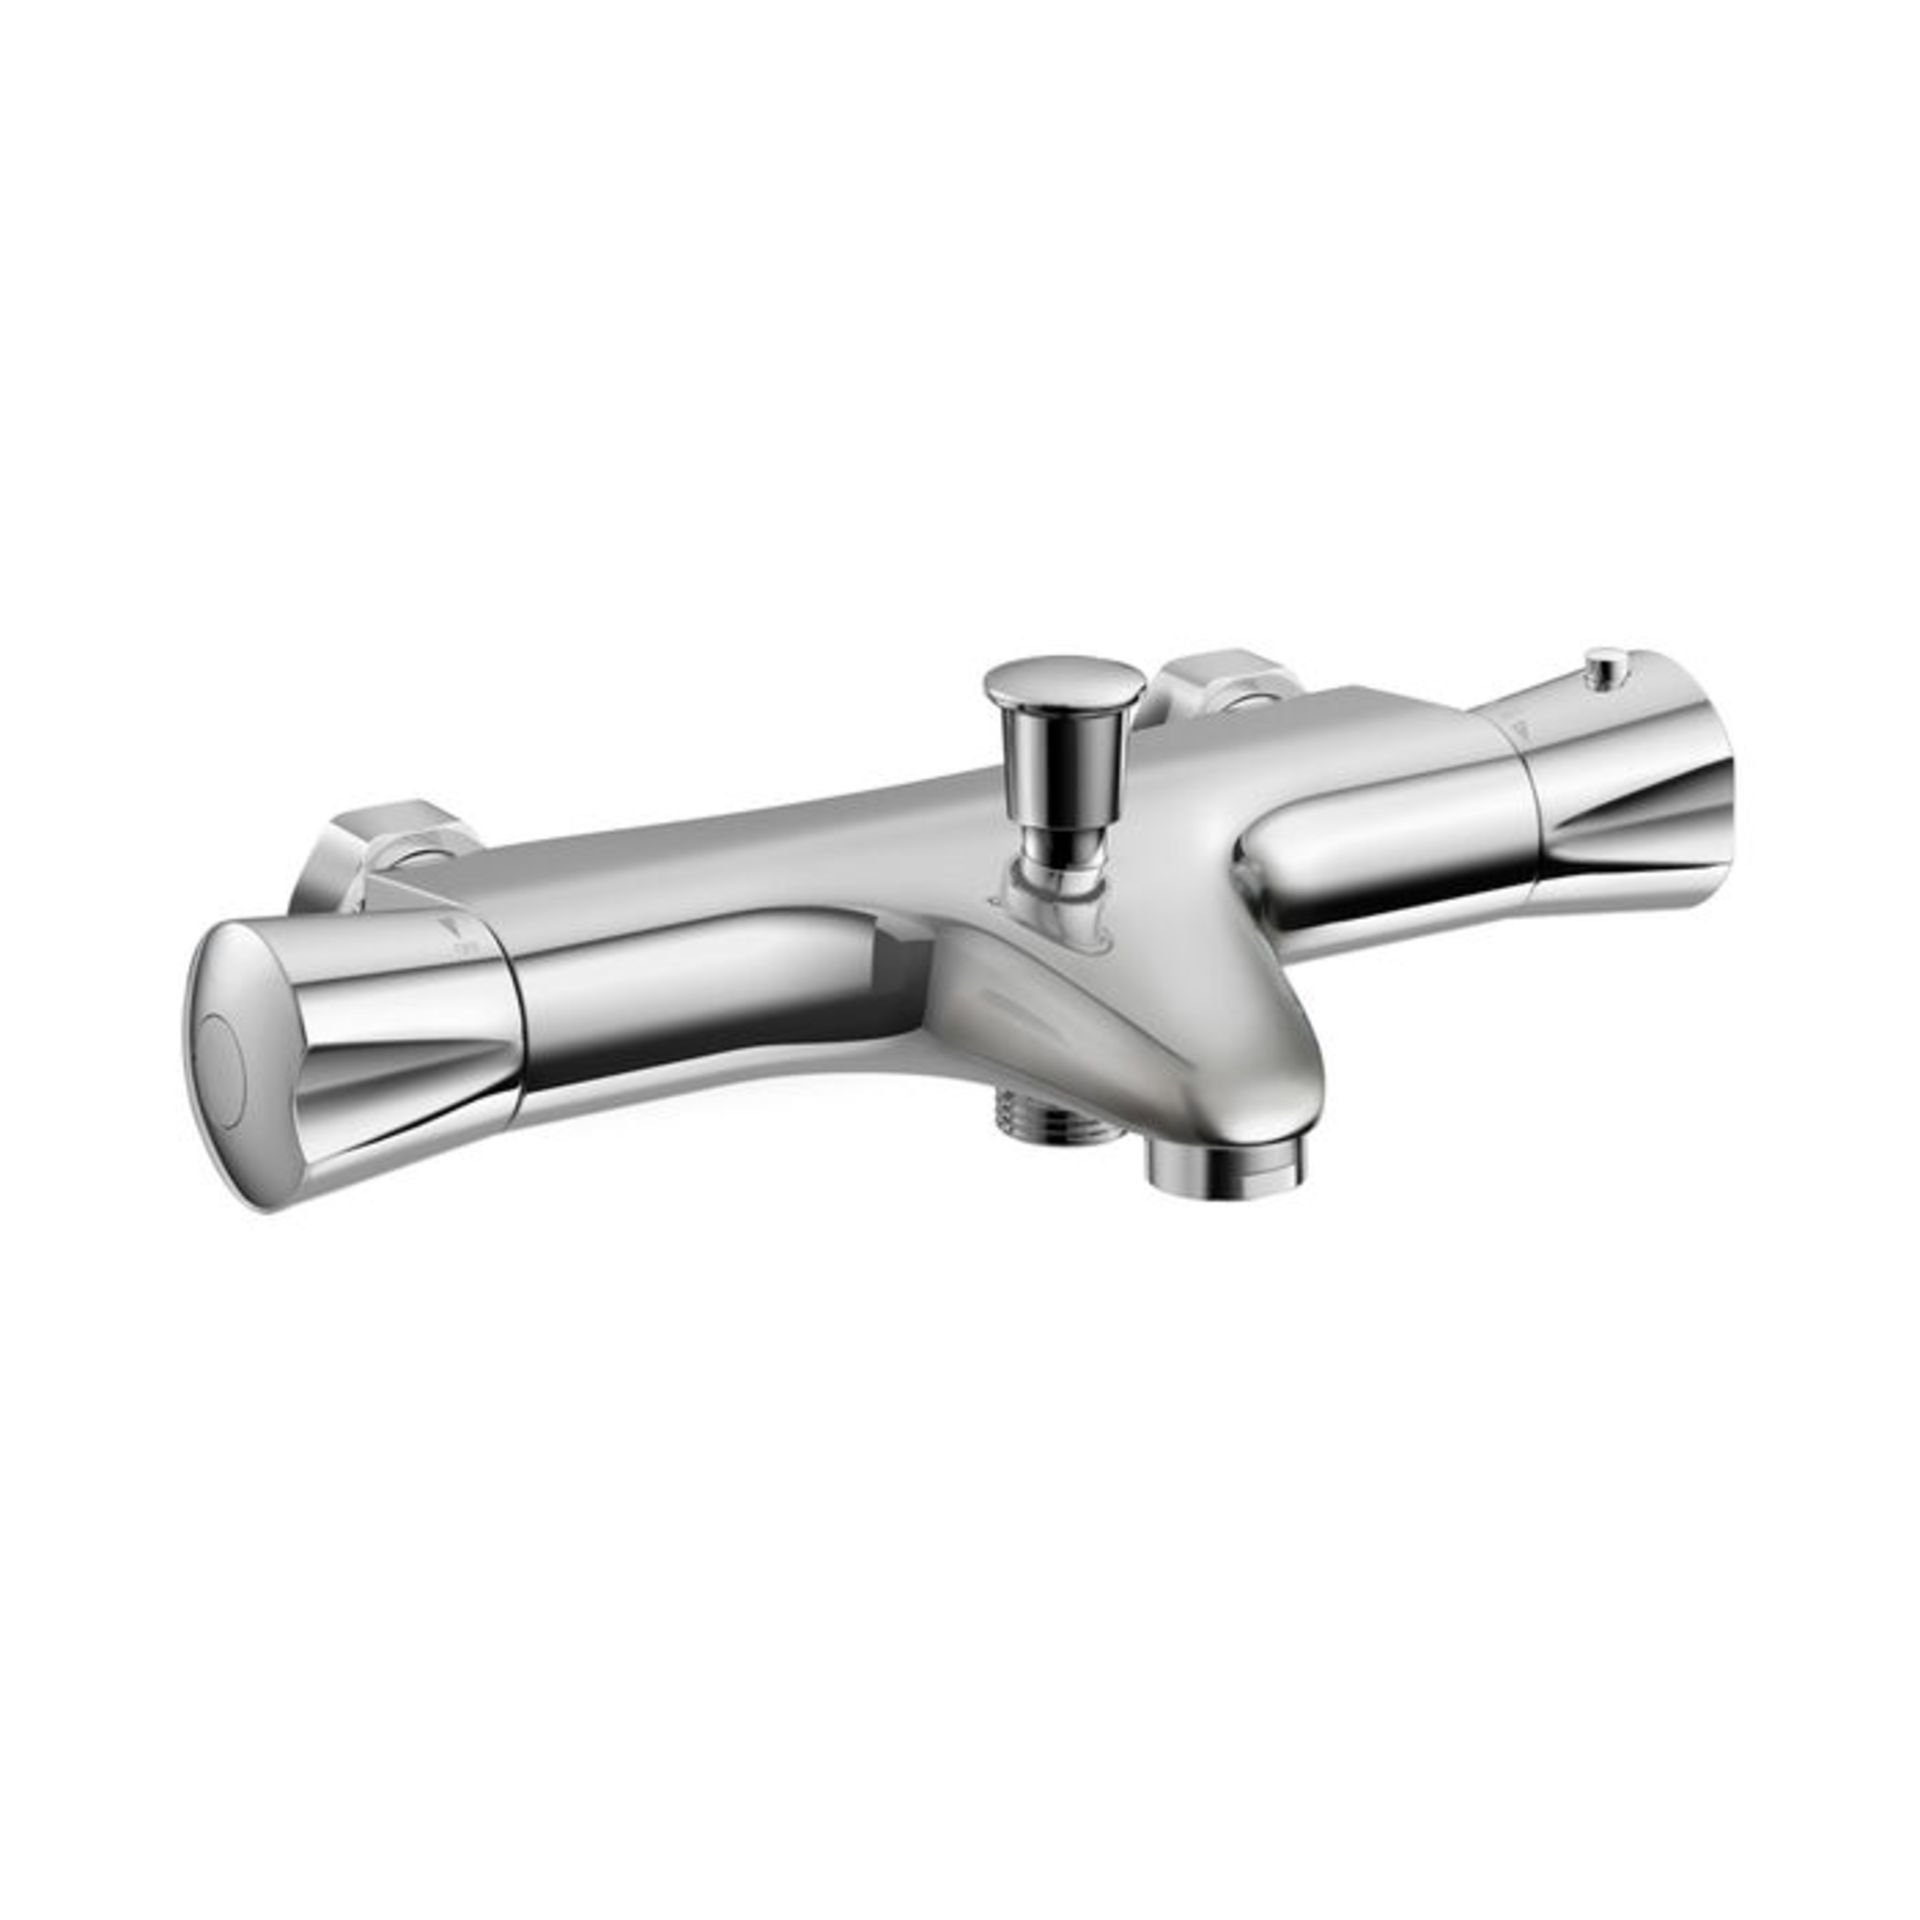 (PM1009) Shower Mixer Valve with Bath Filler. Chrome Plated Solid Brass Mixer Thermostatic mix... - Image 3 of 3